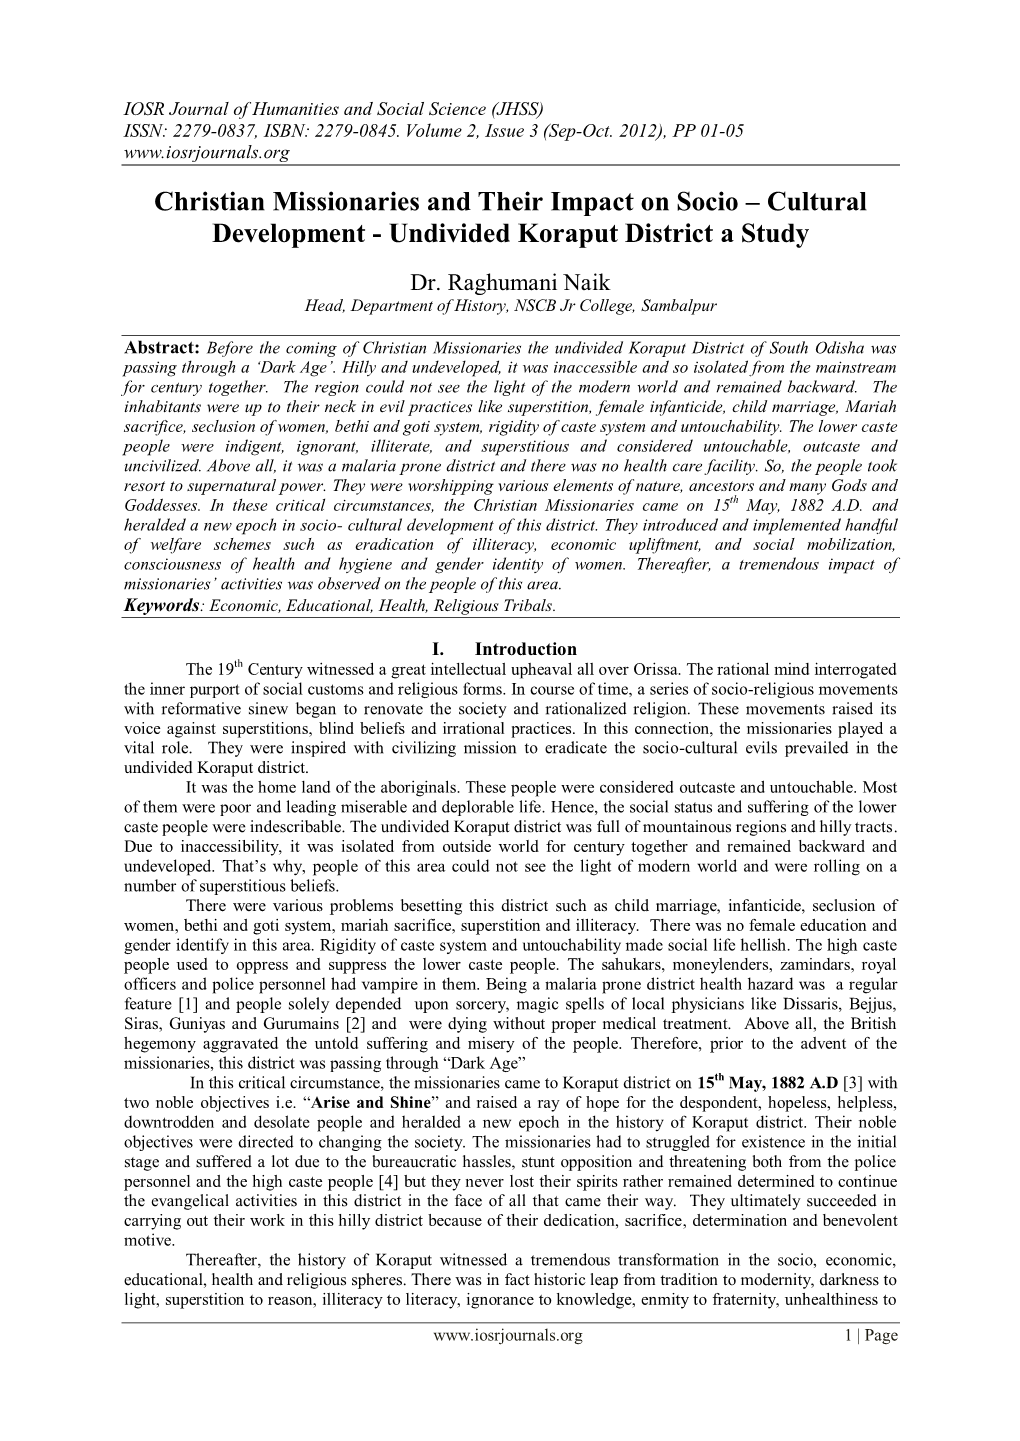 Christian Missionaries and Their Impact on Socio – Cultural Development - Undivided Koraput District a Study